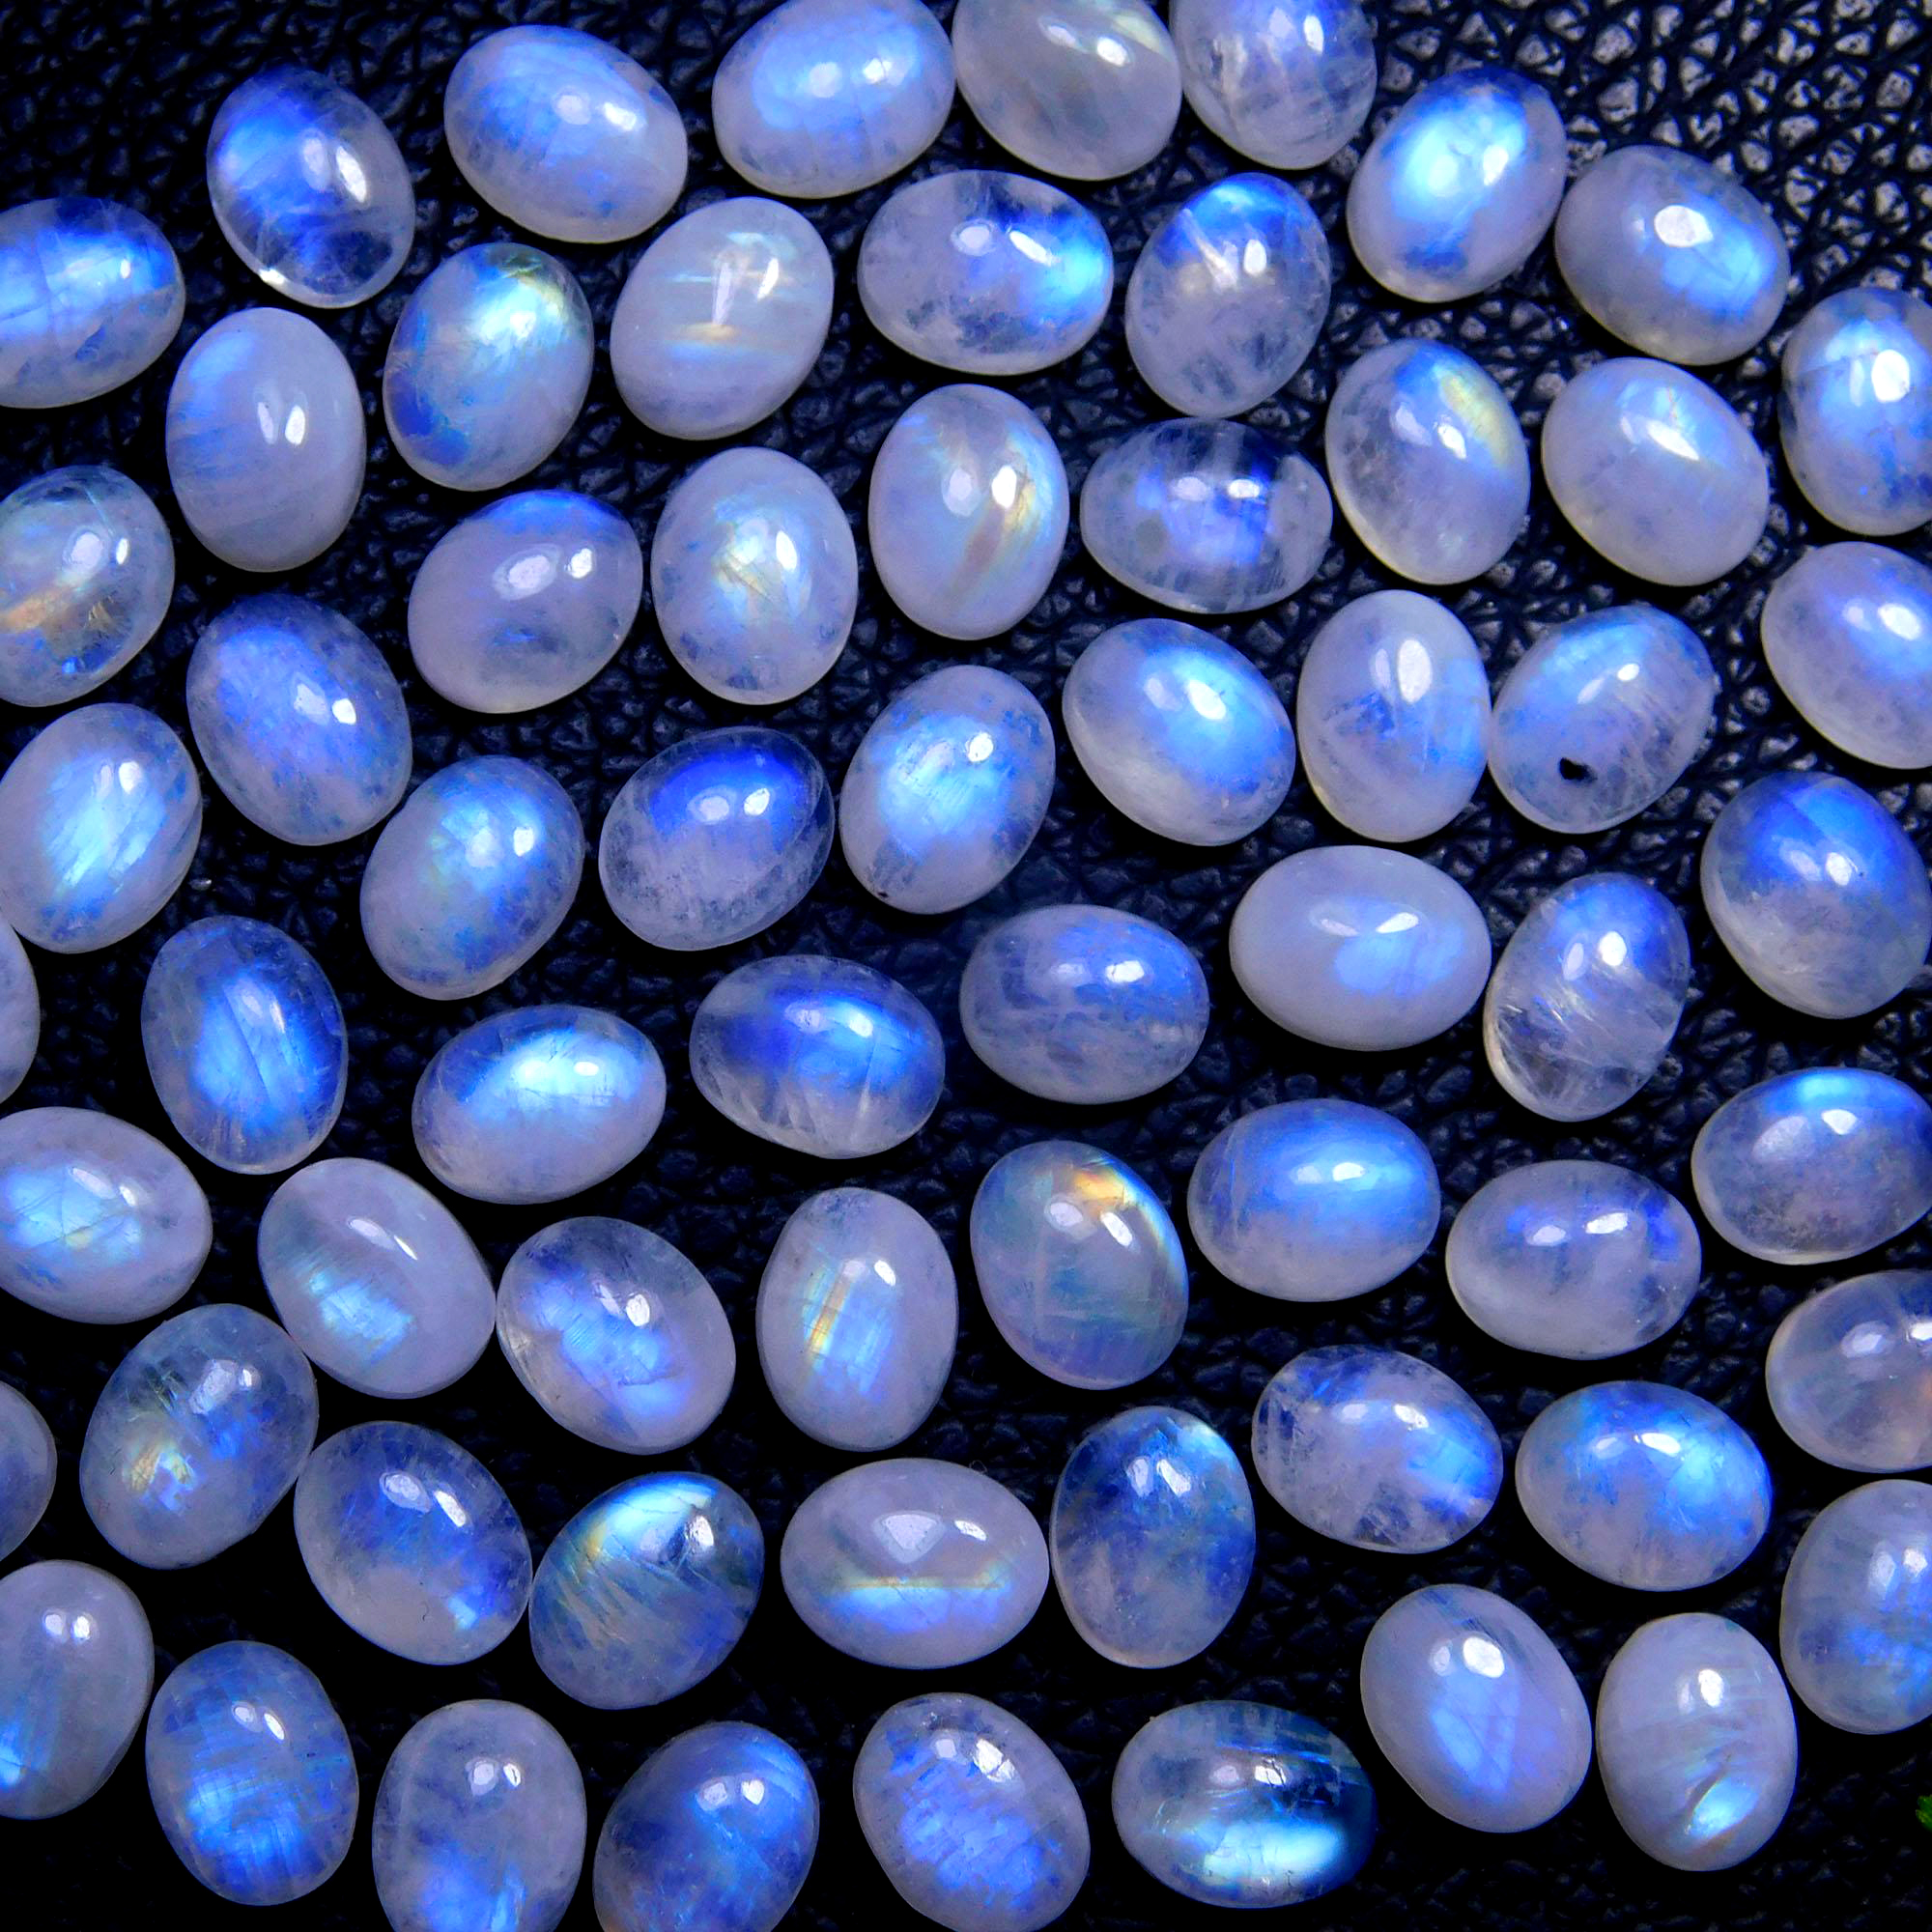 75Pcs 157Cts Natural Rainbow Moonstone Oval Shape Blue Fire Cabochon Lot Loose Gemstone Jewelry Crystal For Birthday Gift 9X7mm #9836